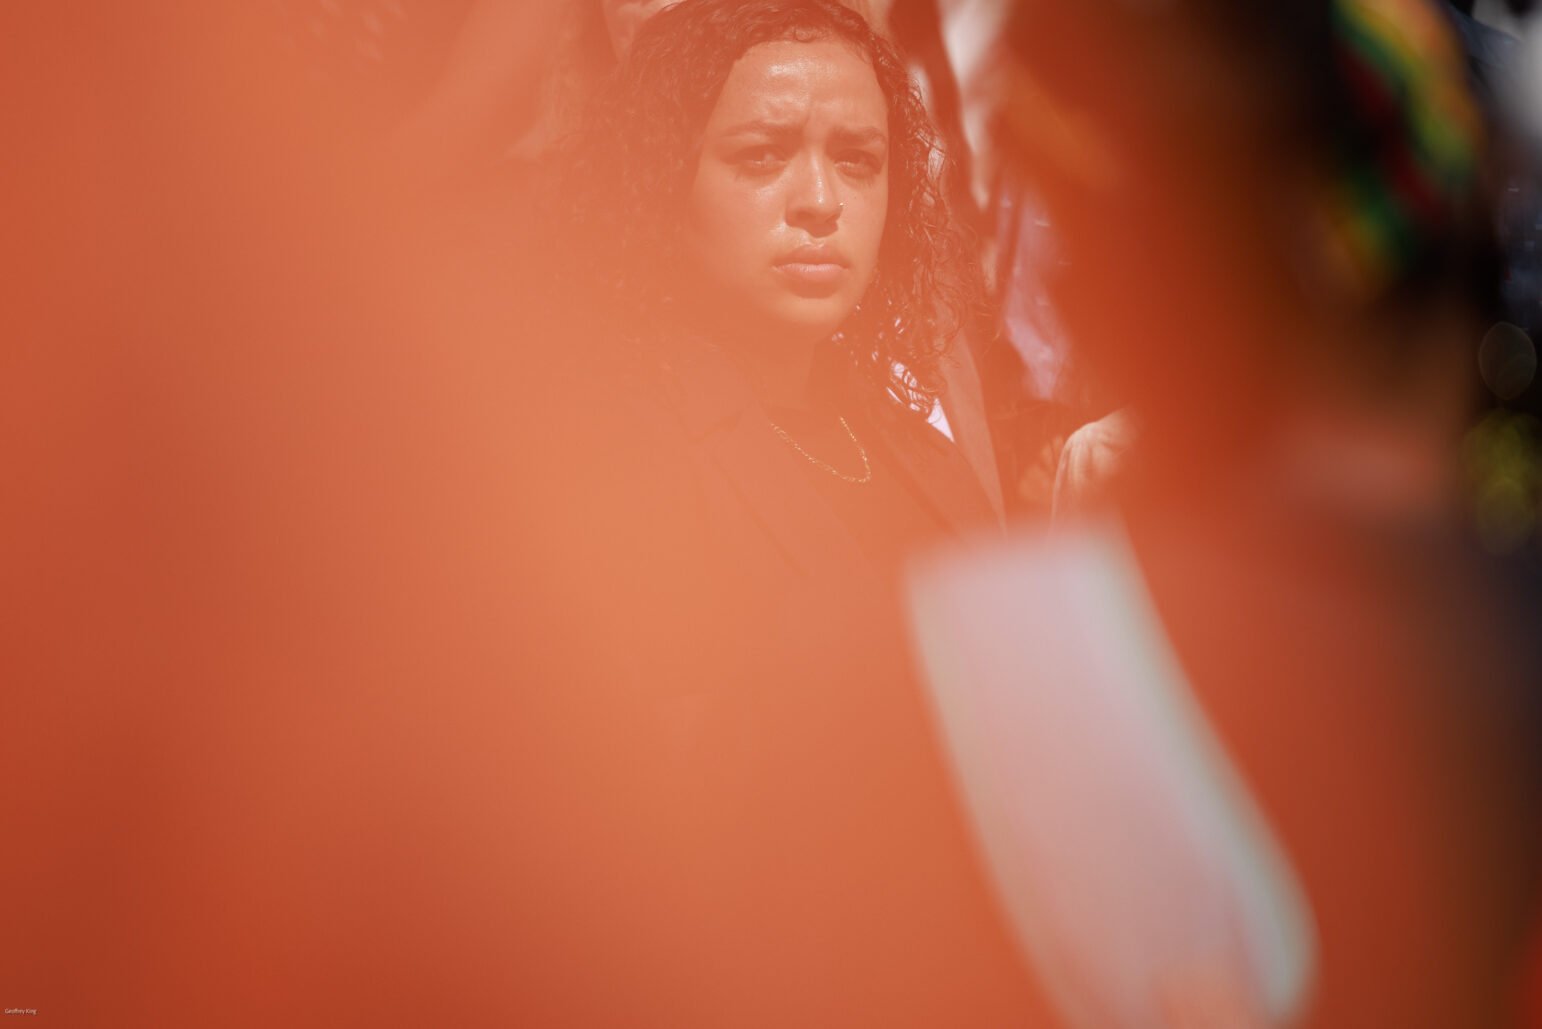 A woman is partially obscured by a bright orange, translucent foreground, creating a dreamlike effect. She appears contemplative and is dressed in professional attire, with her curly hair framing her face, amid a crowd at an outdoor event.